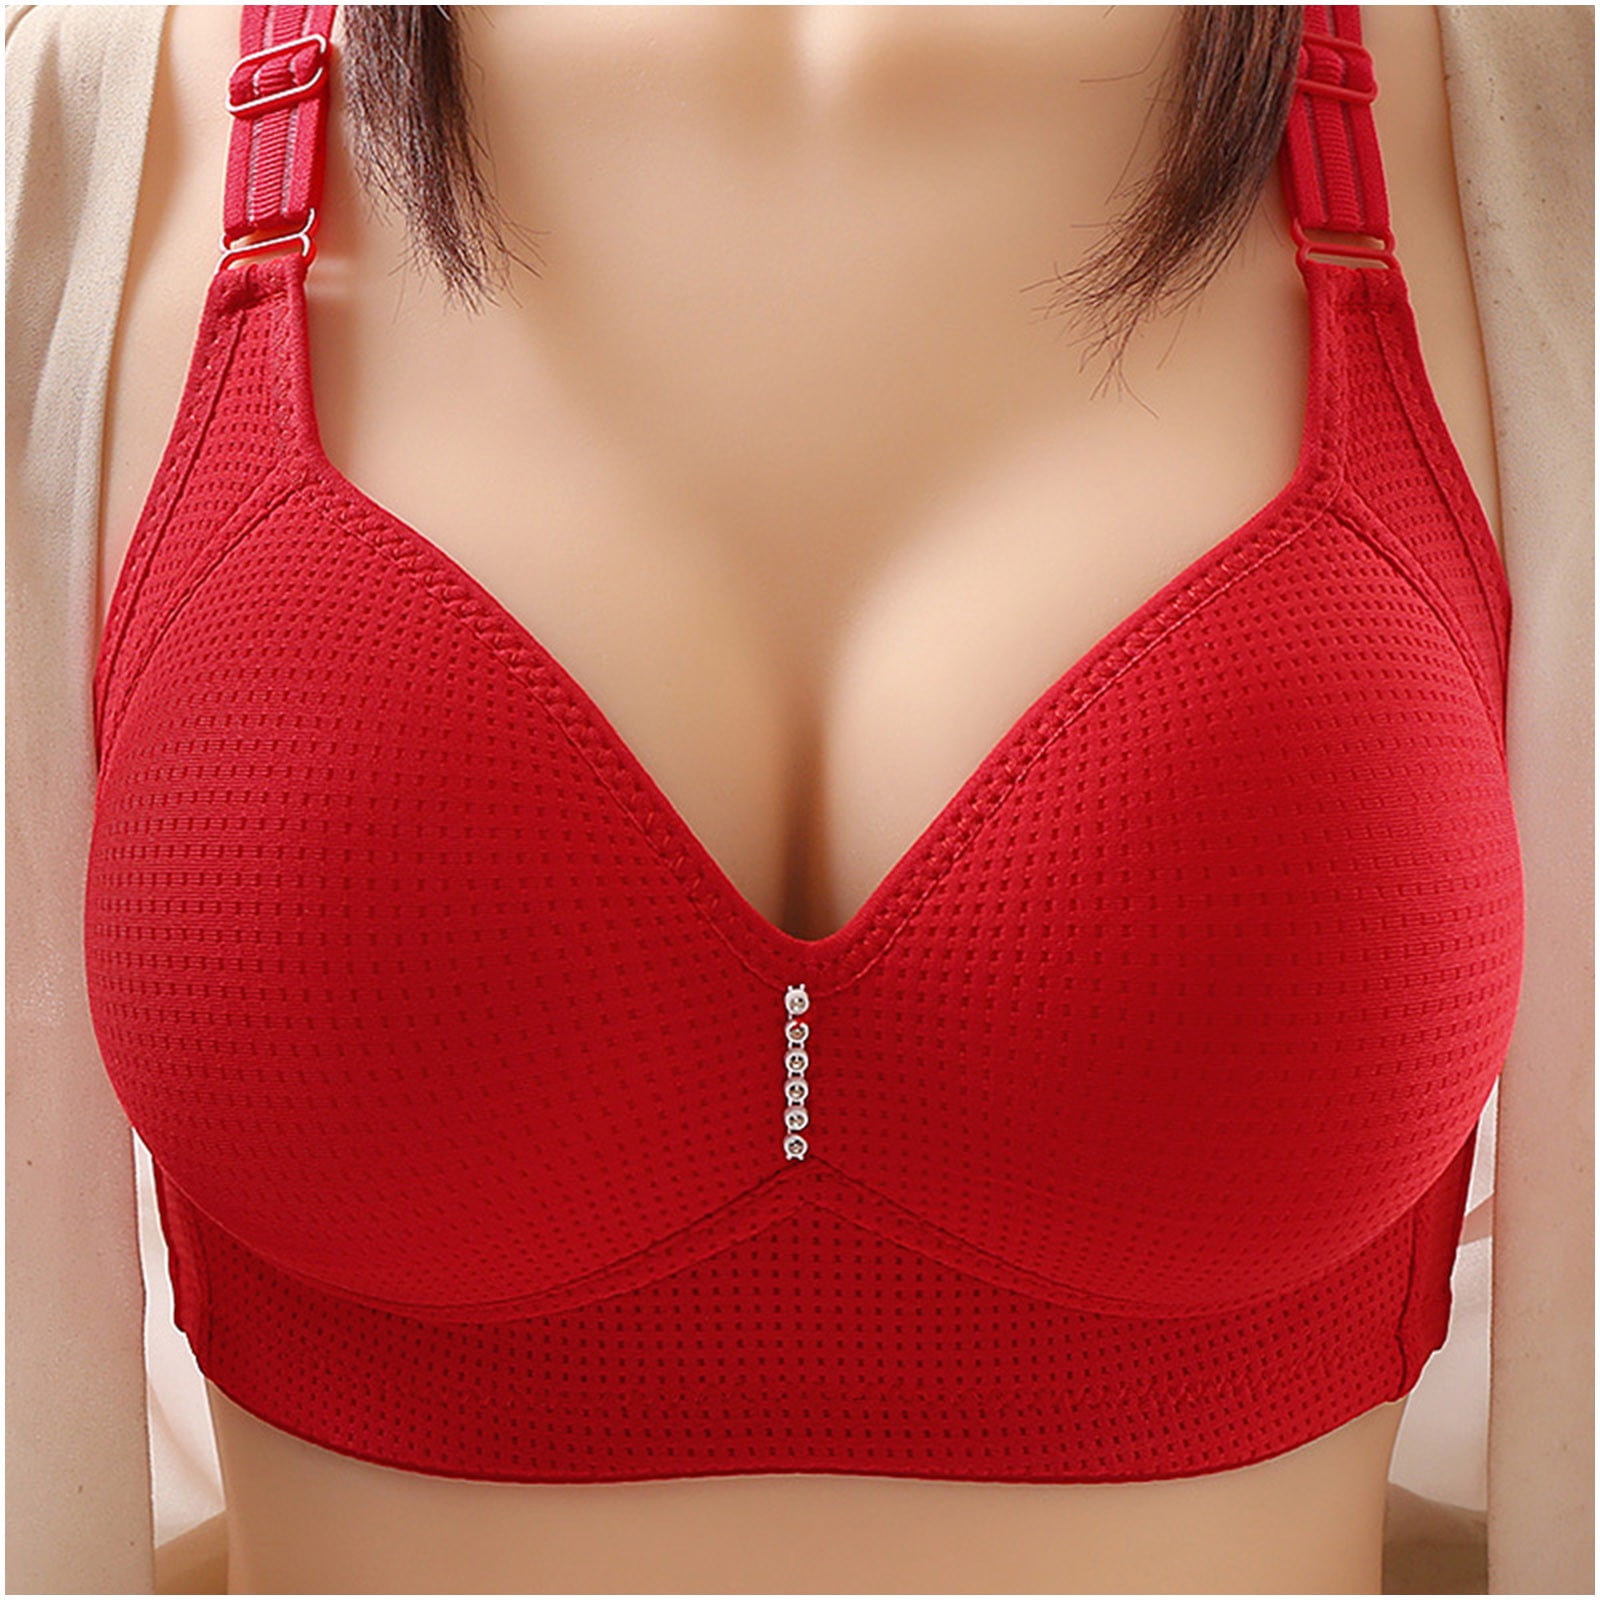 Bras for Women Bra Woman Sexy Ladies Bra Without Steel Rings Sexy Vest  Large Size Lingerie Underwire Nursing Bras Womens Lingerie Bras for Women  on Sales Red,2XL 